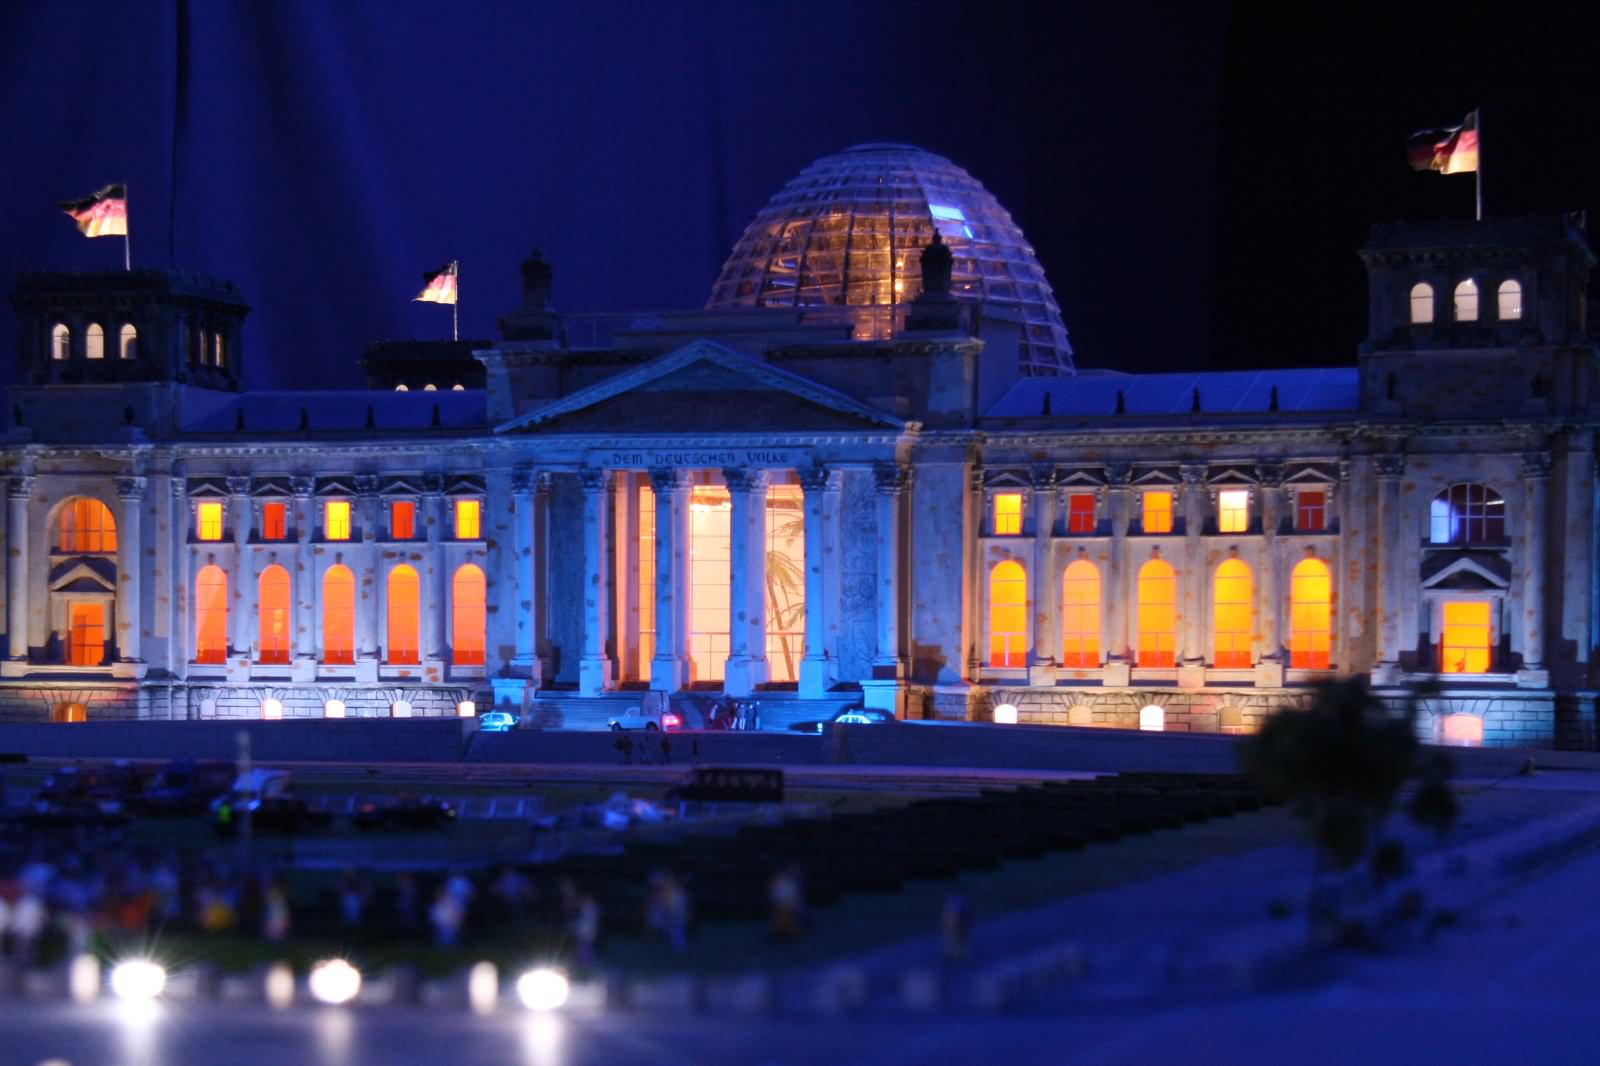 The Reichstag In Berlin, Germany During Night